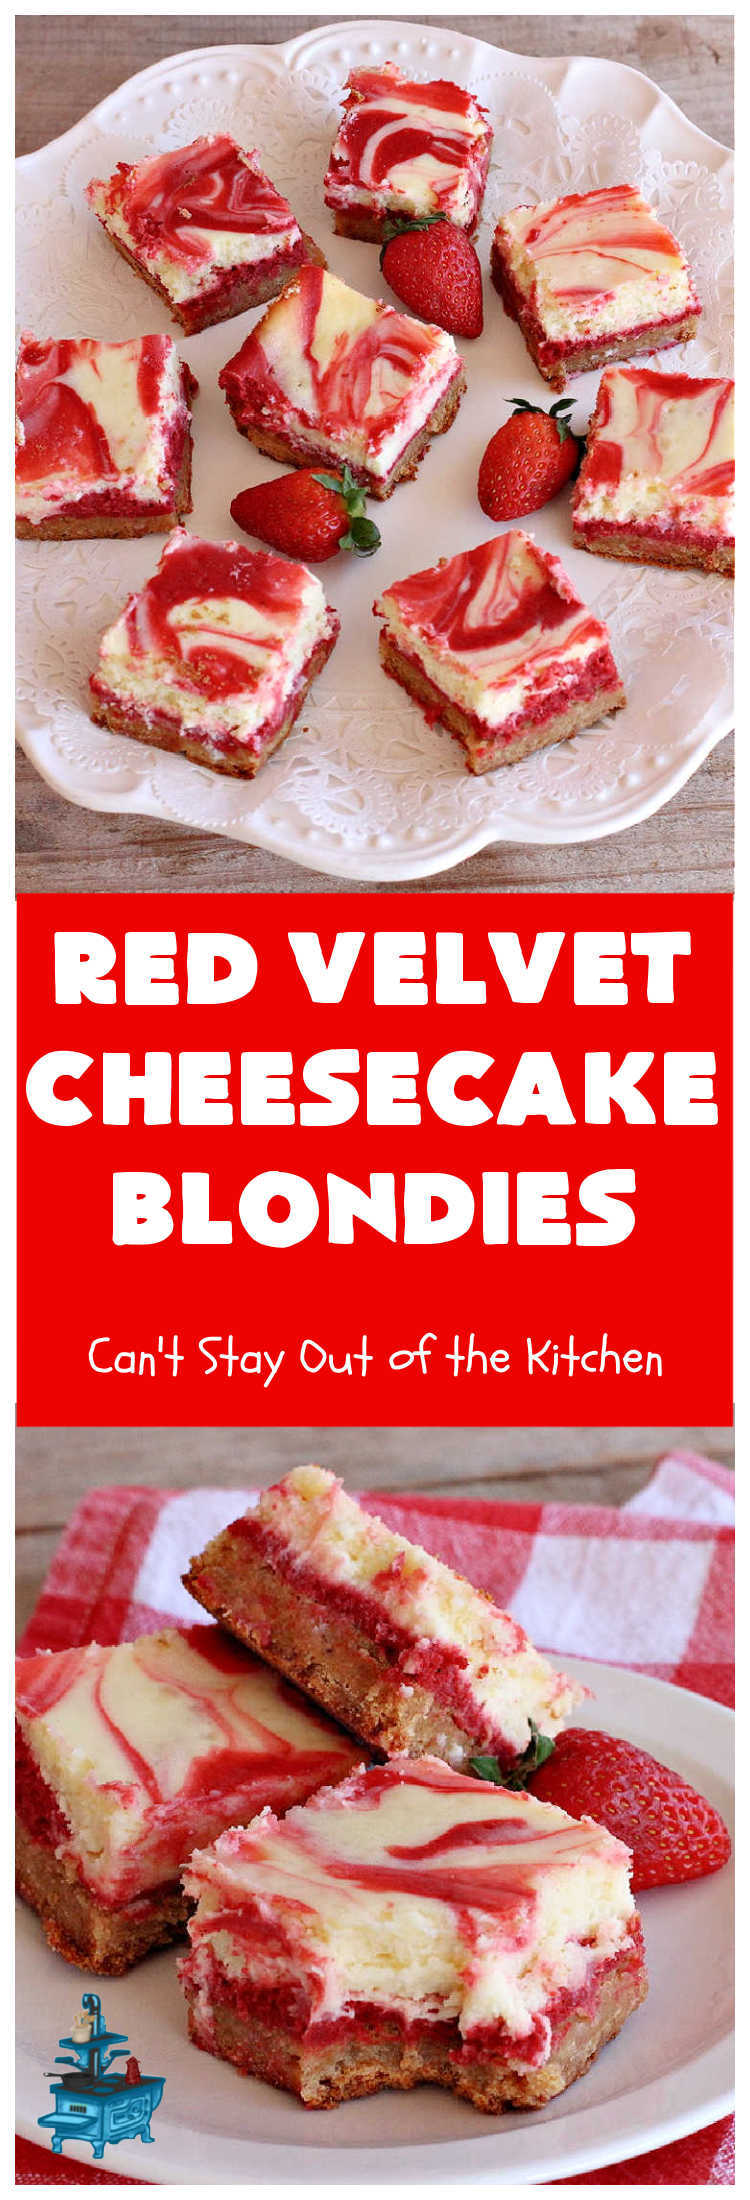 Red Velvet Cheesecake Blondies | Can't Stay Out of the Kitchen | these #RedVelvet #Brownies are so irresistible. The #Cheesecake layer is so mouthwatering. The combination of flavors is rich, decadent & heavenly. Terrific #dessert for #ValentinesDay, #MothersDay, birthdays, special occasions or #potlucks. #RedVelvetCheesecaakeBrownies #RedVelvetCheesecakeBlondies #holiday #RedVelvetDessert #HolidayDessert #ChocolateDessert 